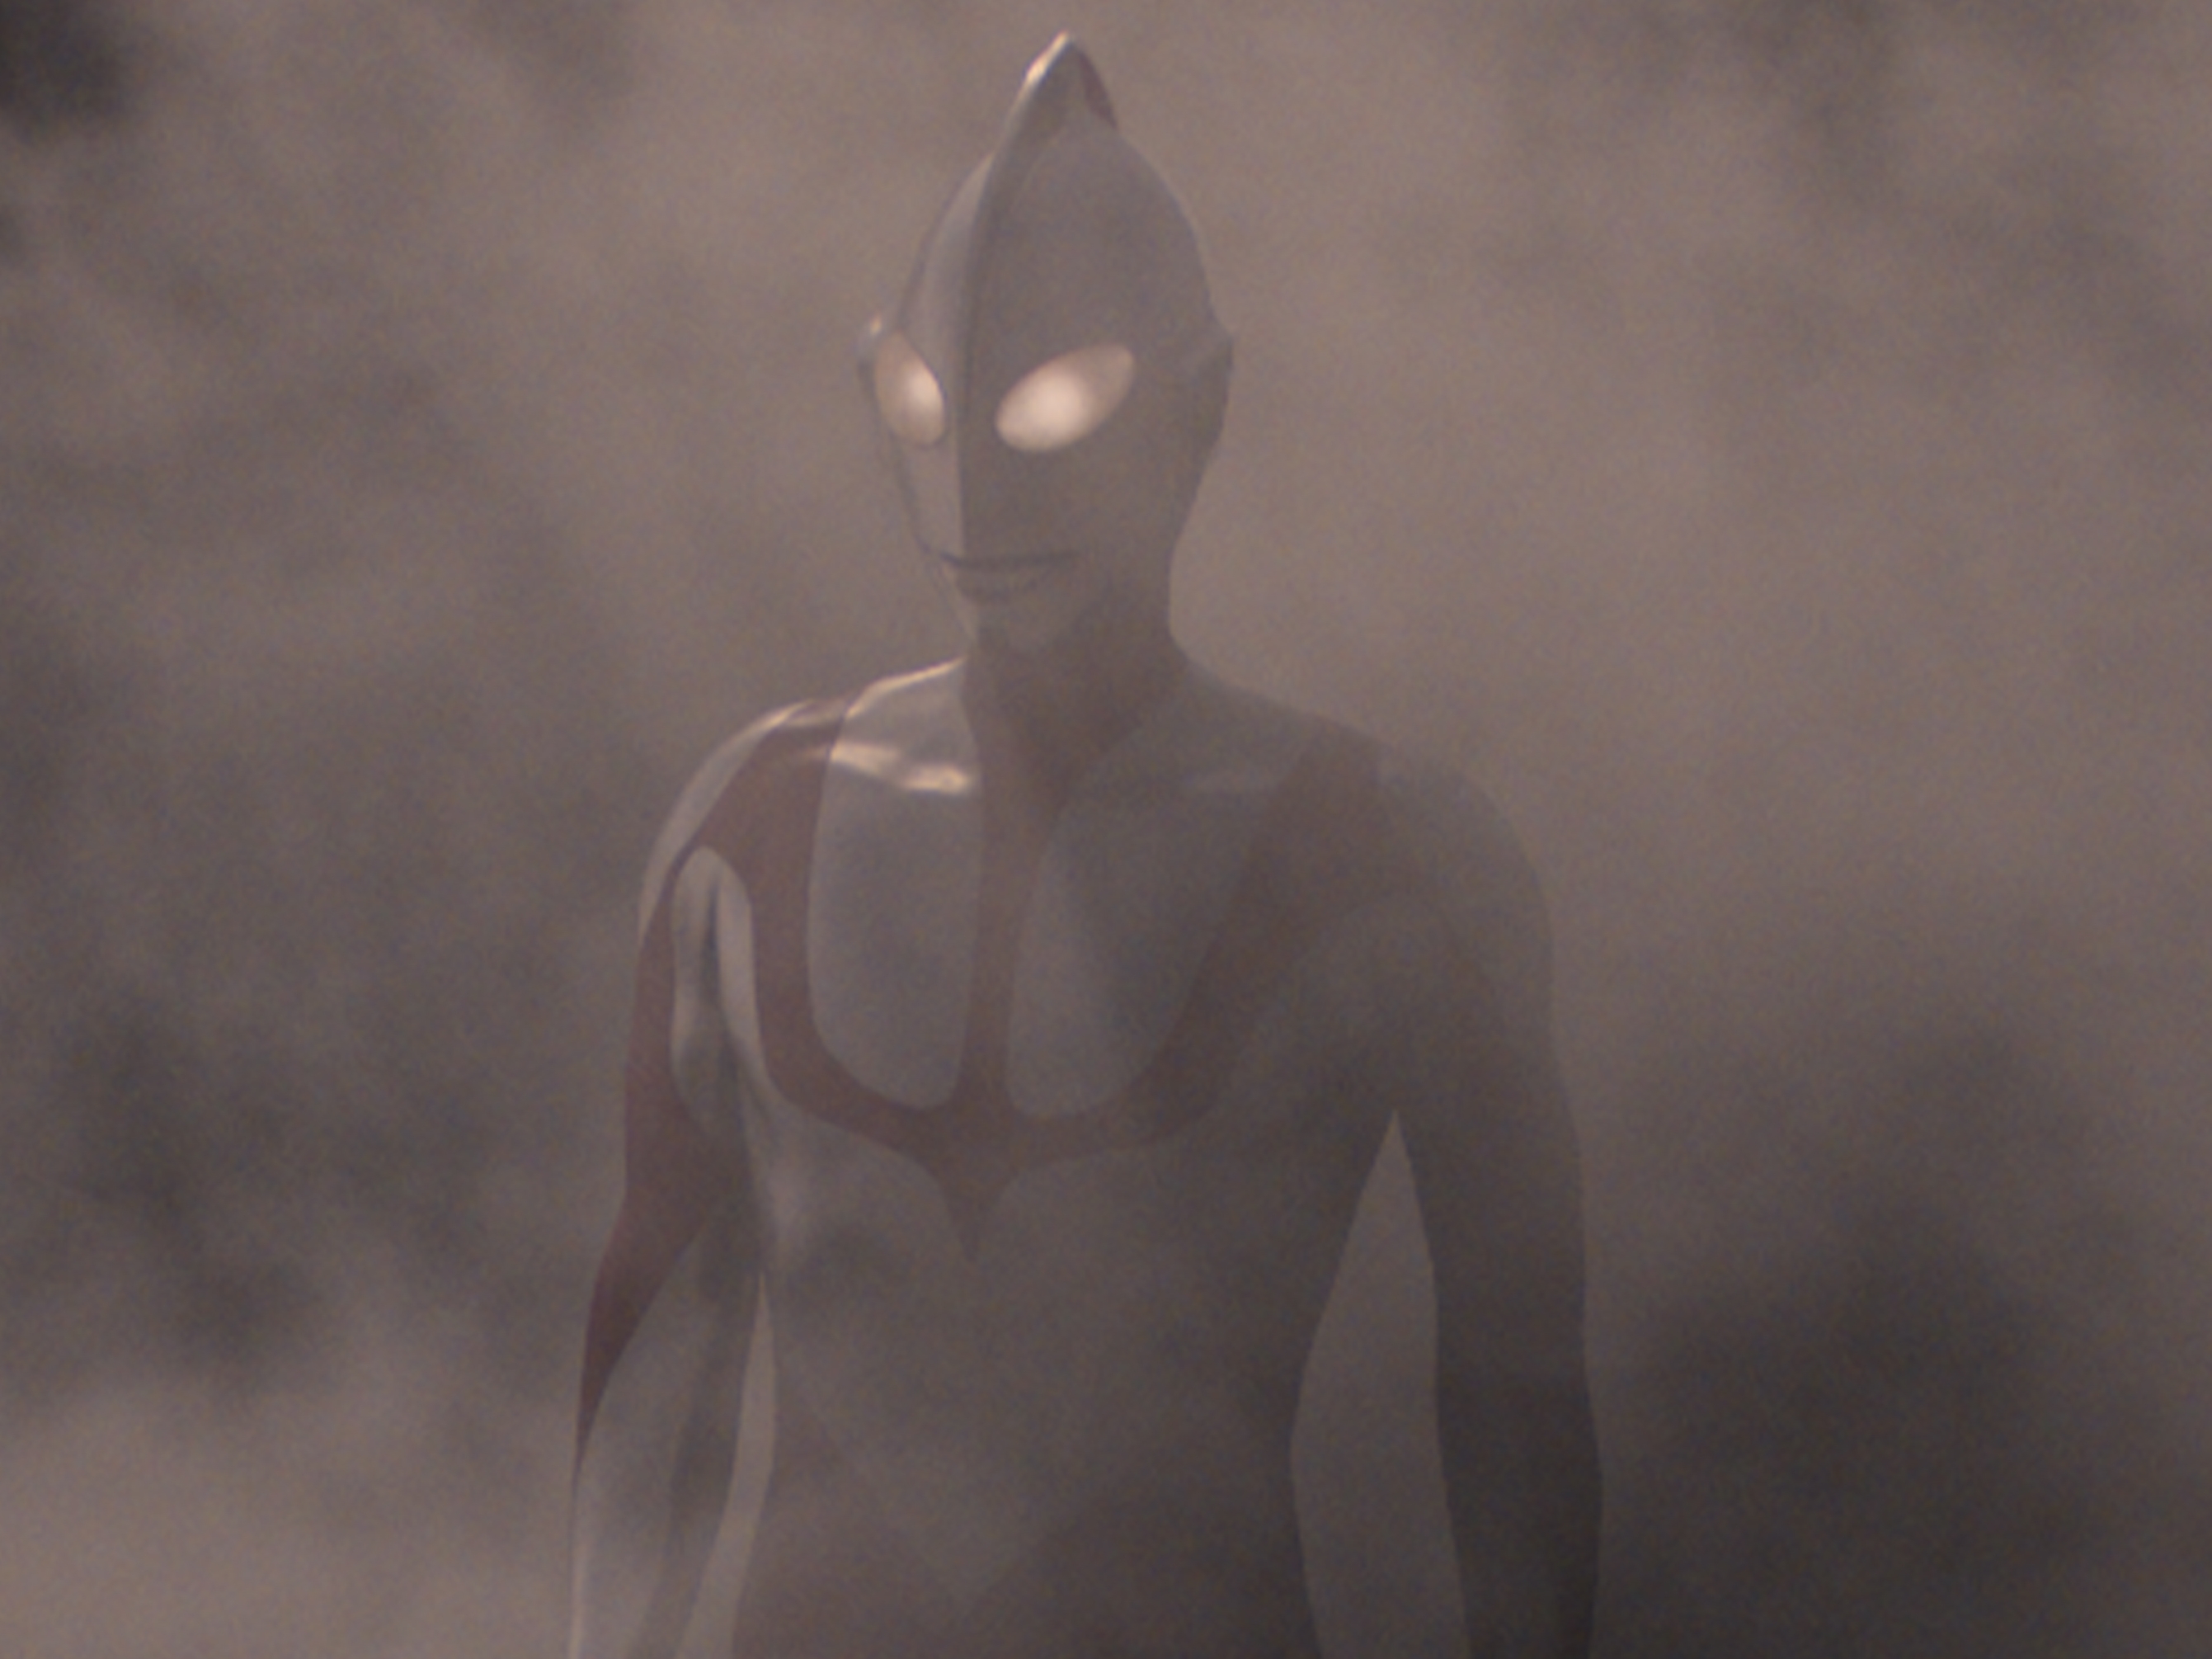 Fort Worth Convention Center hosts Anime Frontier event, screening of 'Shin  Ultraman'